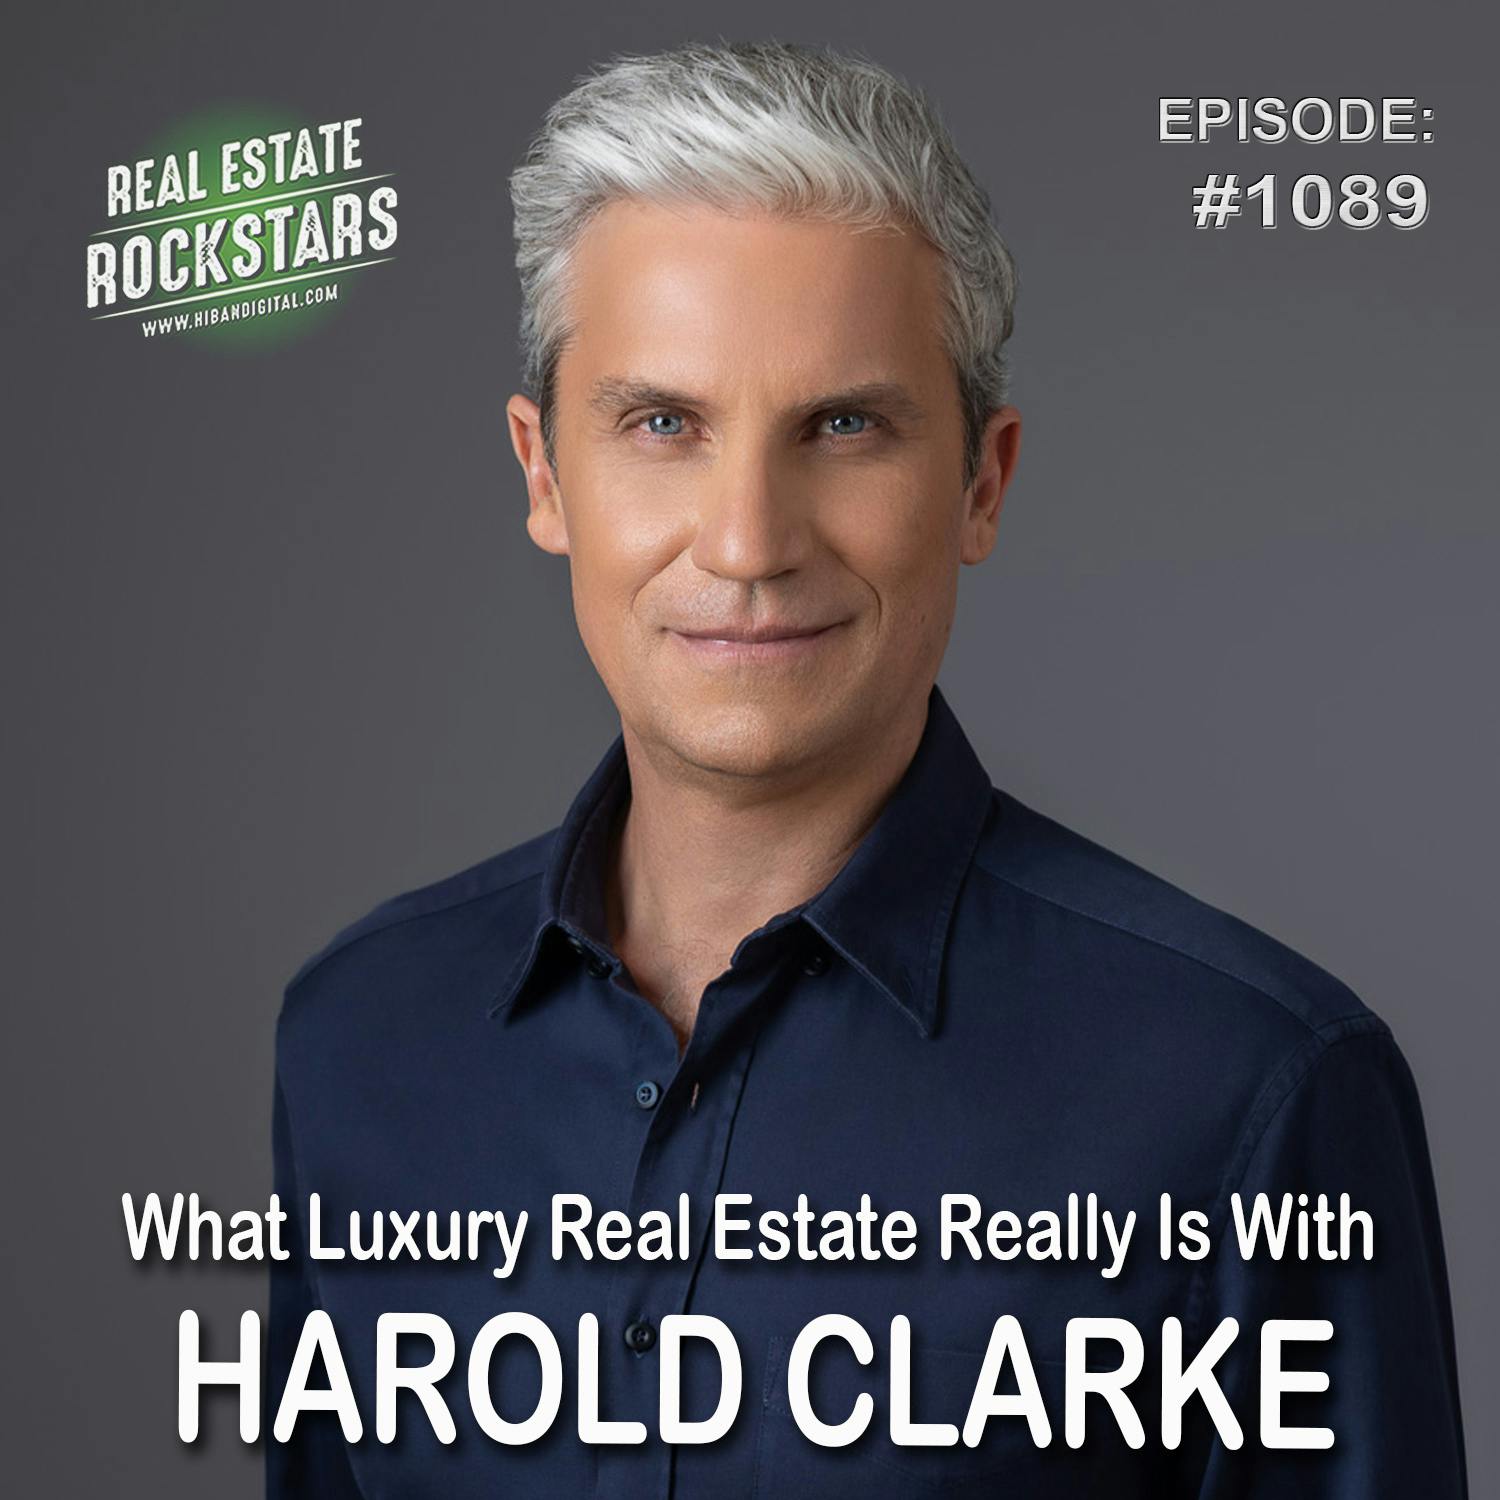 1089: What Luxury Real Estate Really Is With Harold Clarke